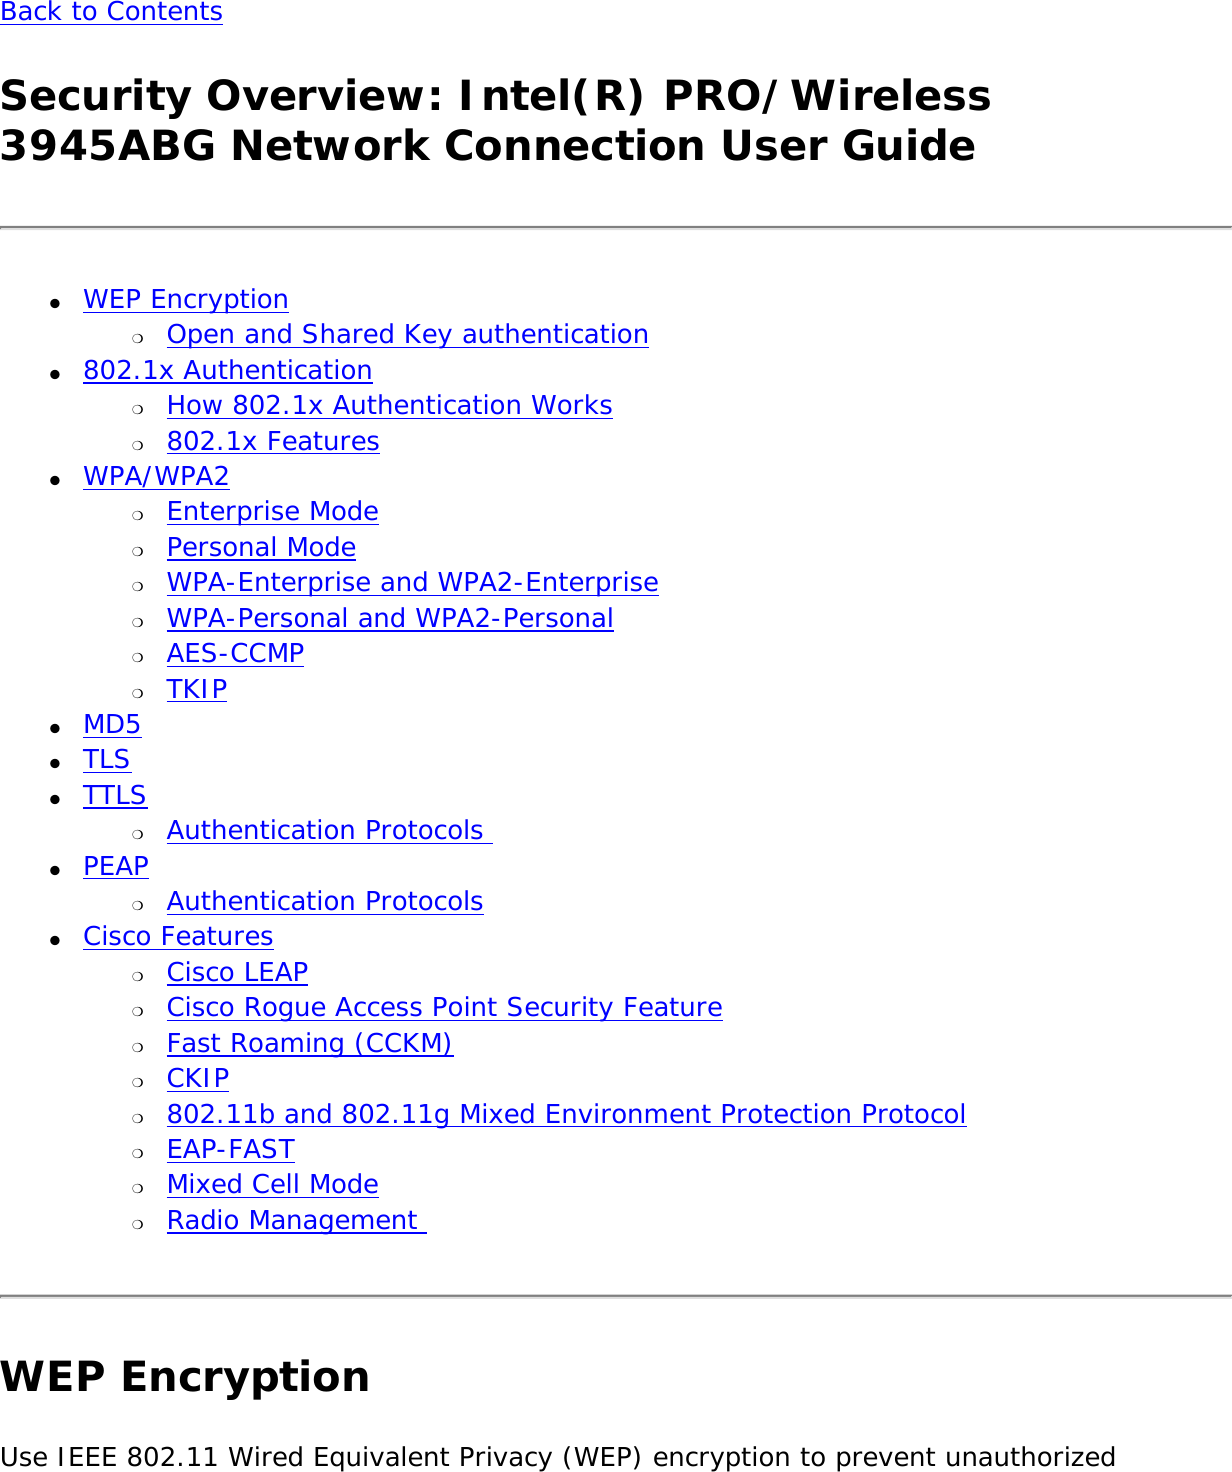 Back to Contents Security Overview: Intel(R) PRO/Wireless 3945ABG Network Connection User Guide●     WEP Encryption ❍     Open and Shared Key authentication●     802.1x Authentication ❍     How 802.1x Authentication Works❍     802.1x Features●     WPA/WPA2 ❍     Enterprise Mode❍     Personal Mode❍     WPA-Enterprise and WPA2-Enterprise ❍     WPA-Personal and WPA2-Personal ❍     AES-CCMP❍     TKIP●     MD5●     TLS●     TTLS ❍     Authentication Protocols ●     PEAP ❍     Authentication Protocols●     Cisco Features ❍     Cisco LEAP❍     Cisco Rogue Access Point Security Feature❍     Fast Roaming (CCKM)❍     CKIP❍     802.11b and 802.11g Mixed Environment Protection Protocol❍     EAP-FAST❍     Mixed Cell Mode❍     Radio Management WEP EncryptionUse IEEE 802.11 Wired Equivalent Privacy (WEP) encryption to prevent unauthorized 